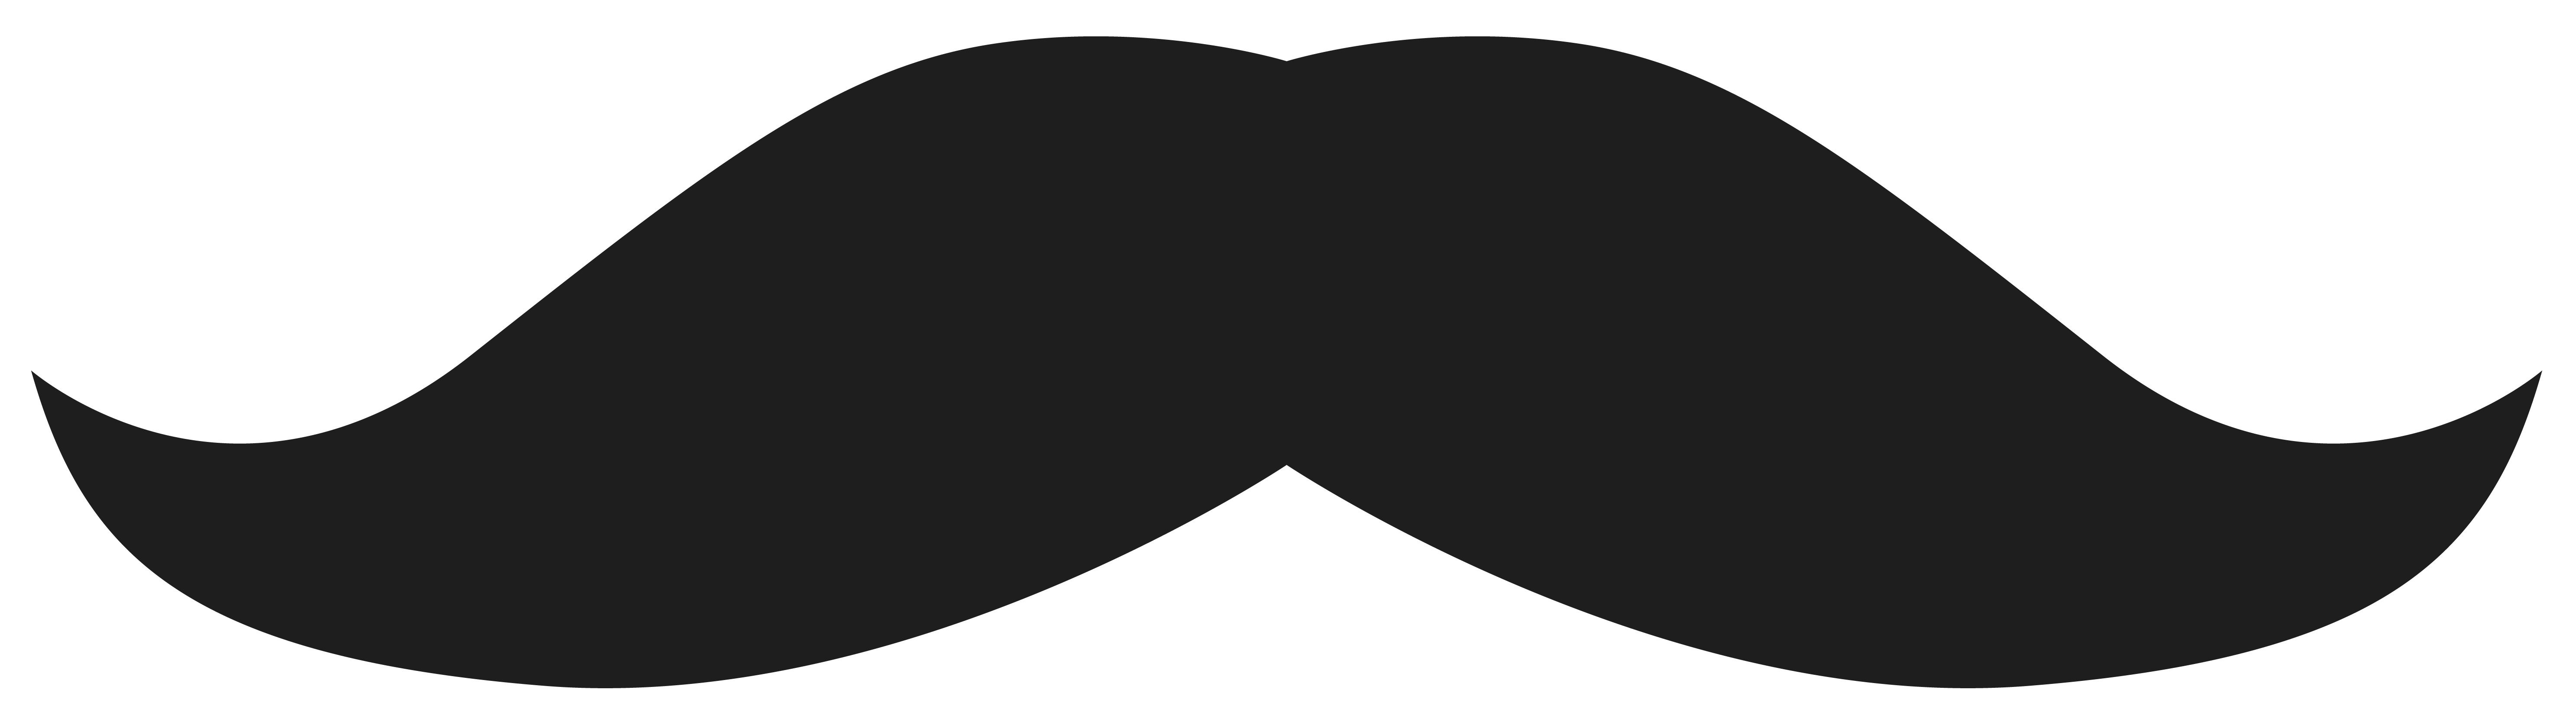 No Shave Movember Mustache Download Free PNG